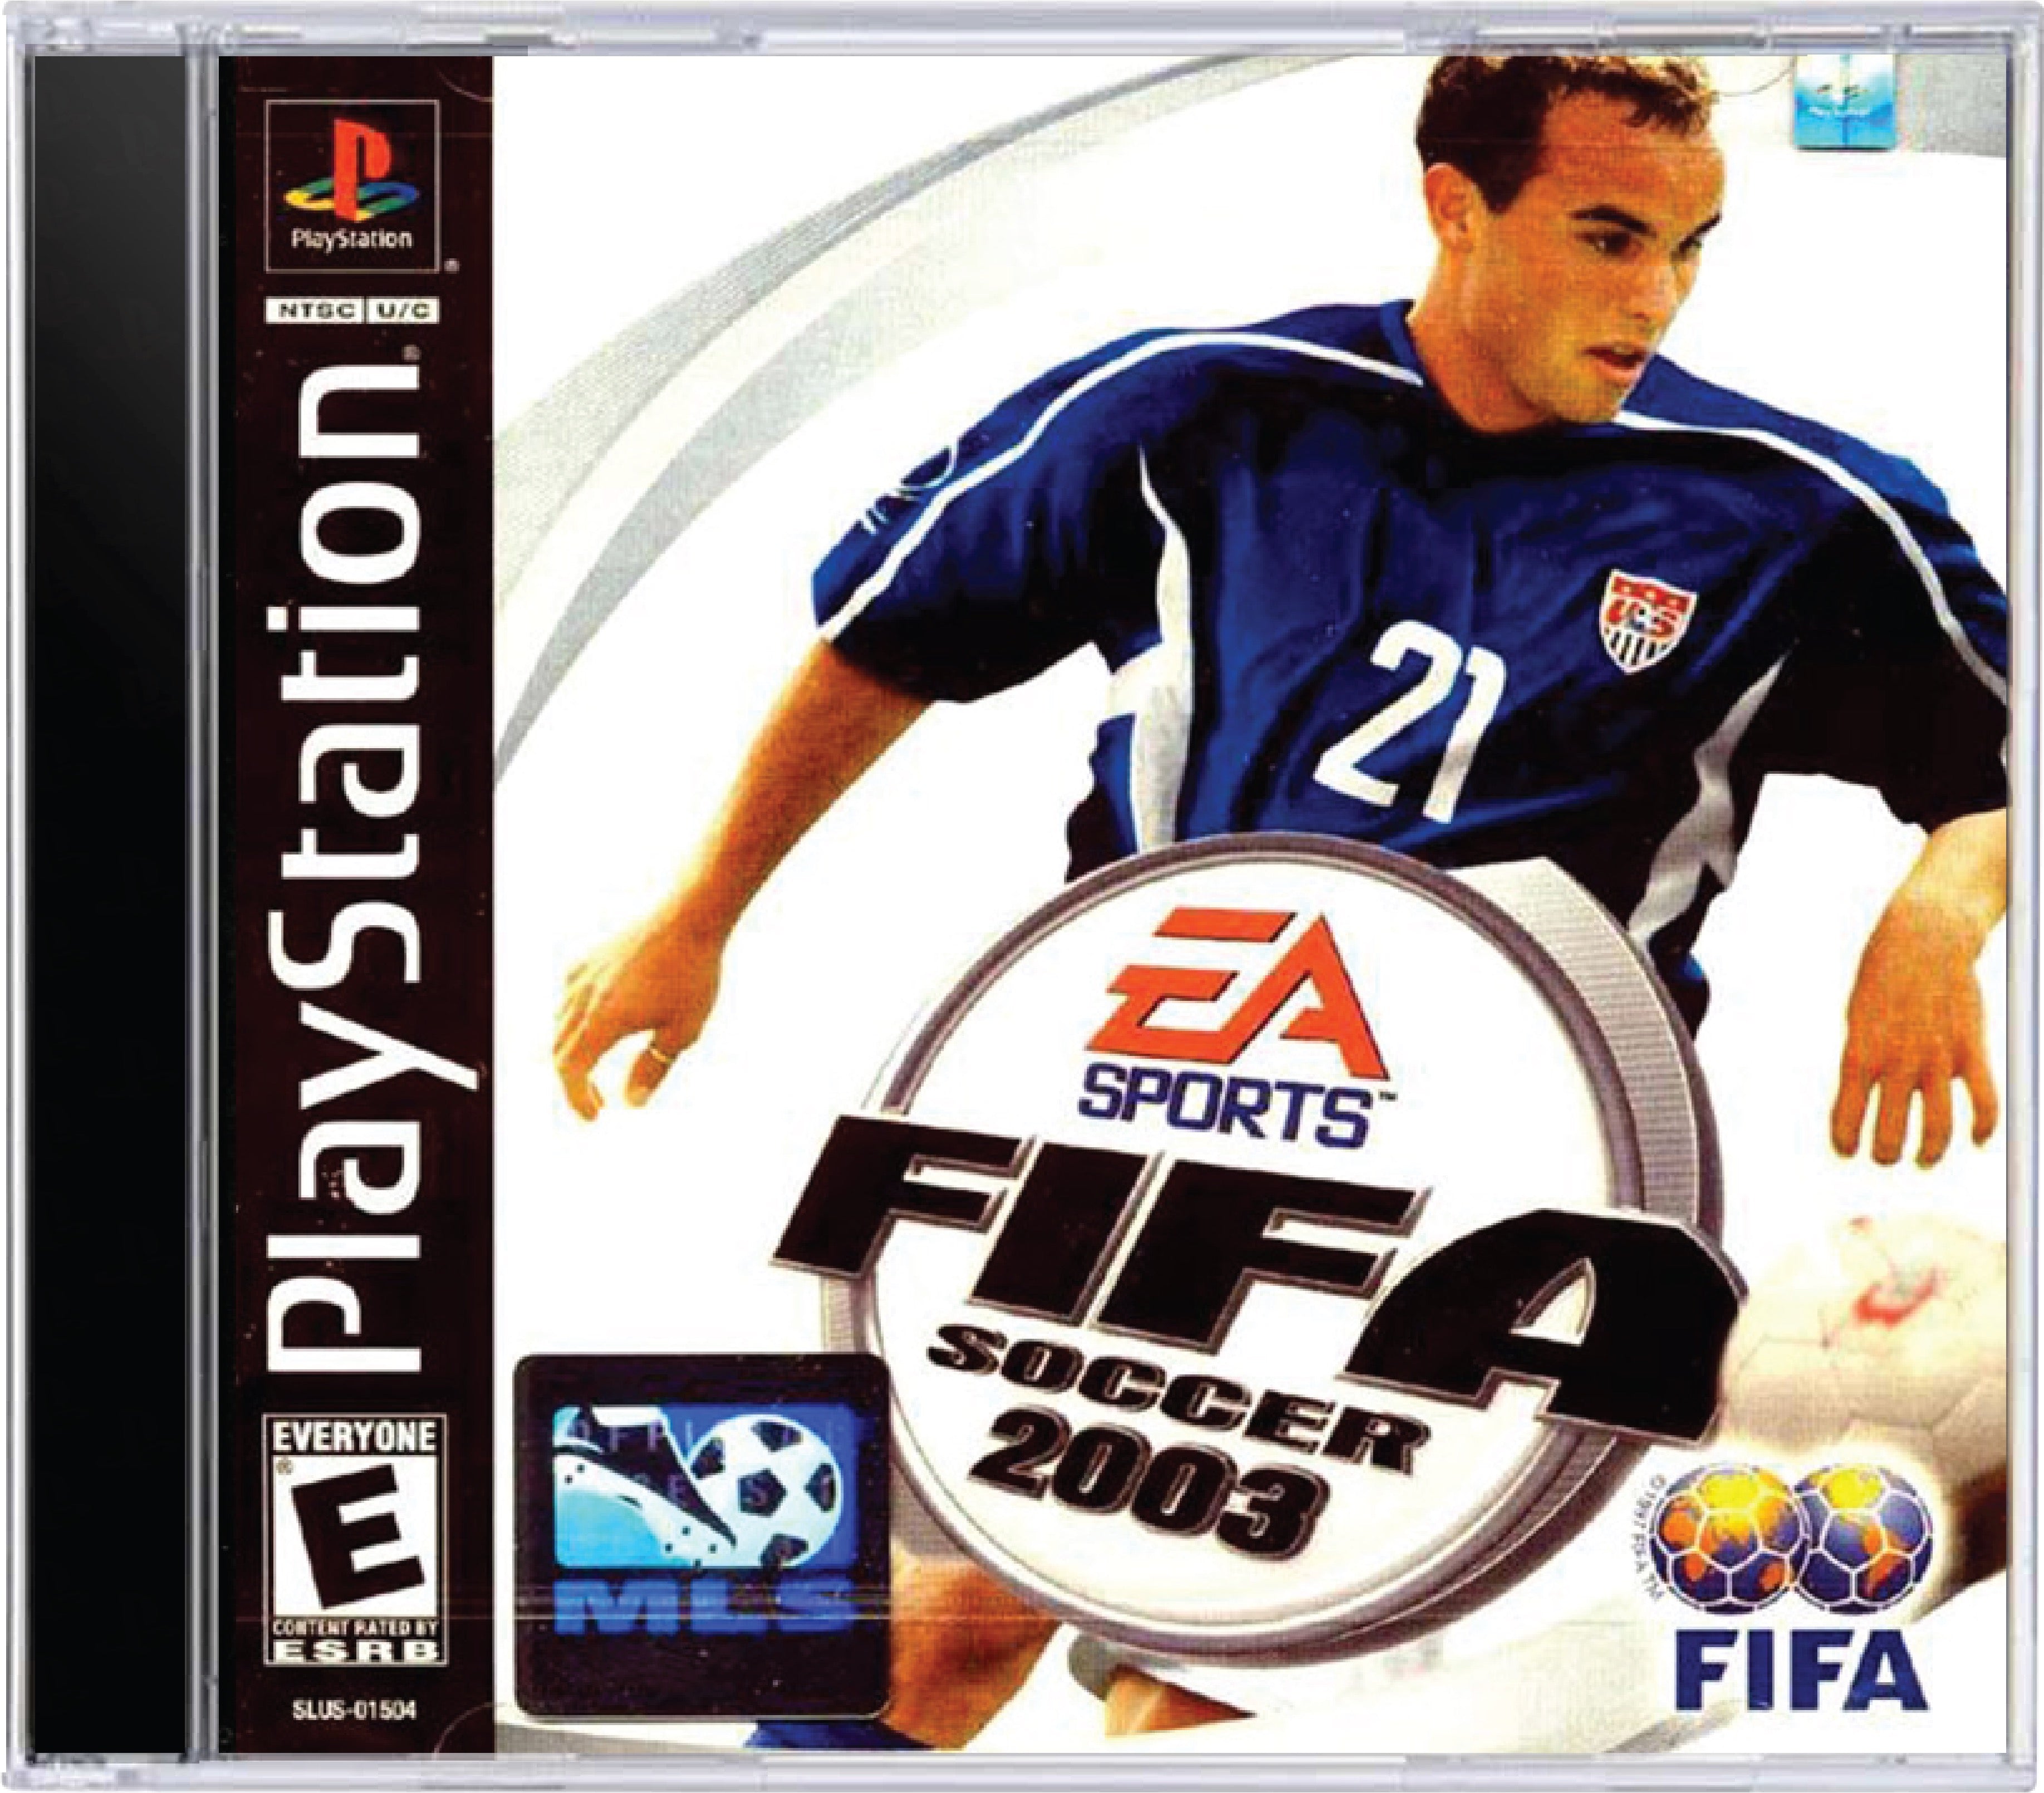 FIFA 2003 Cover Art and Product Photo